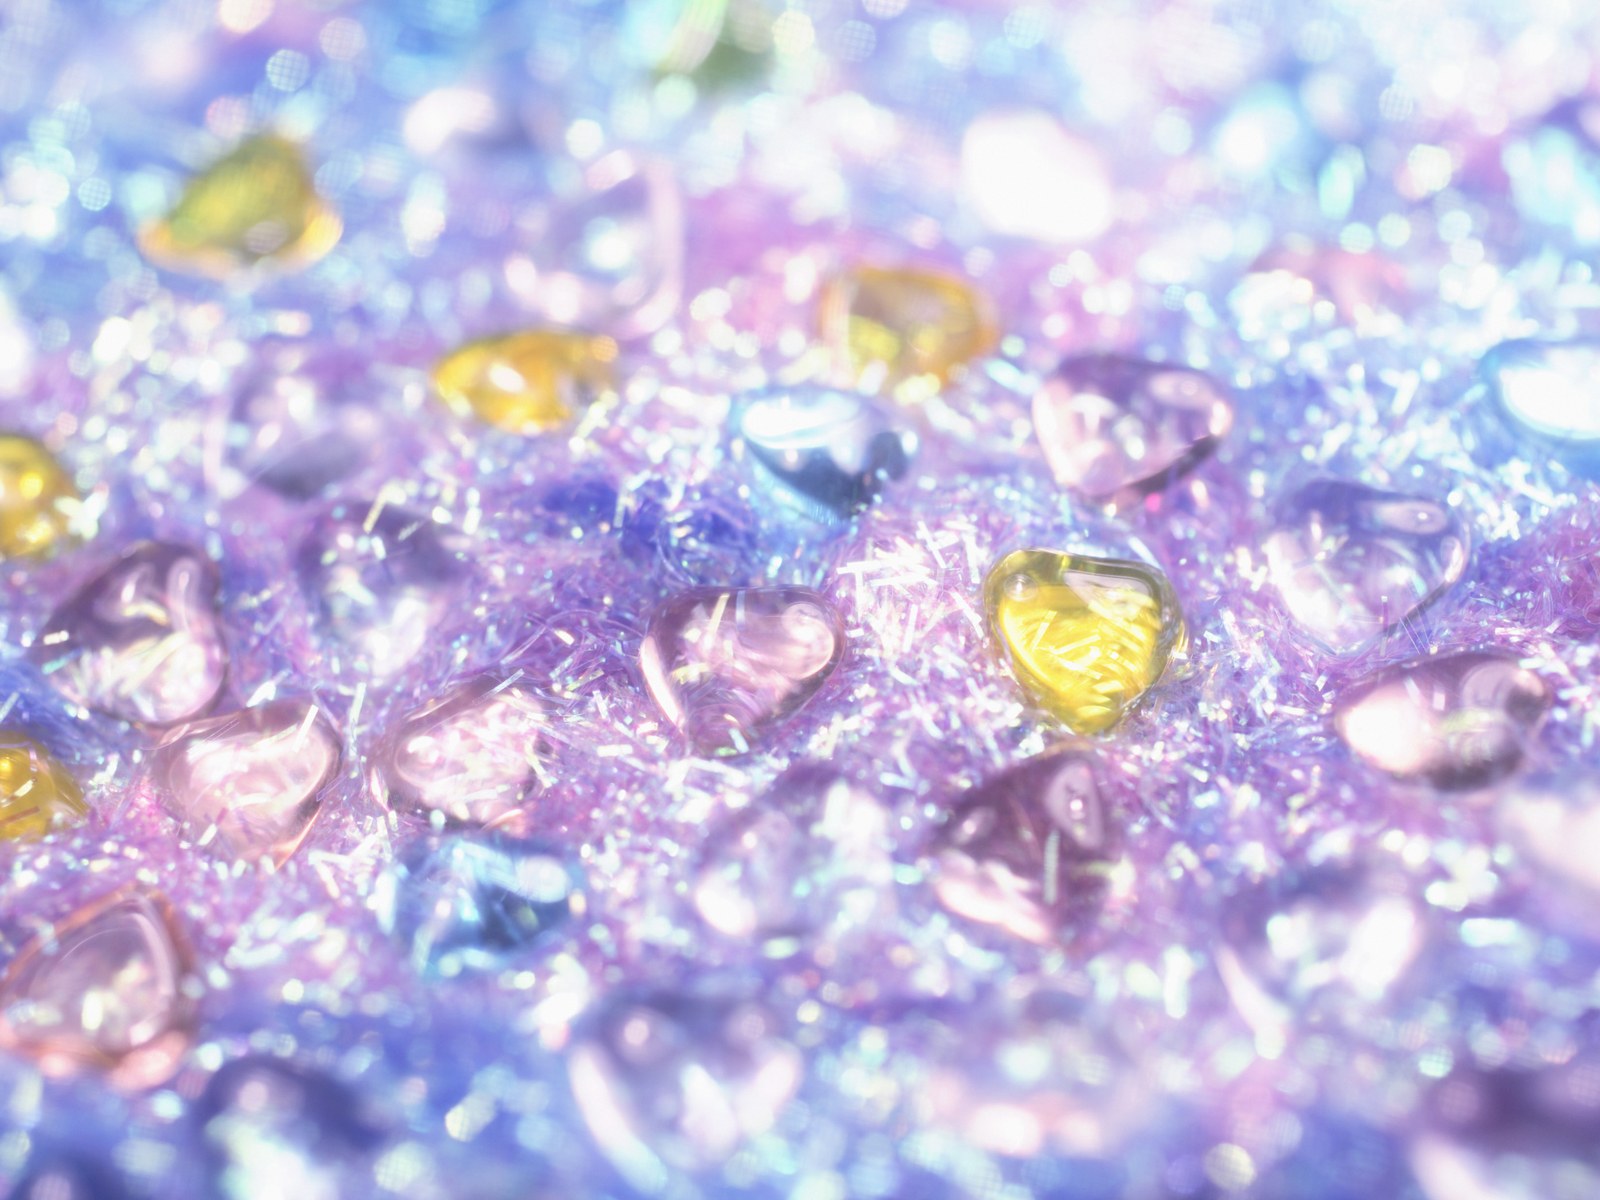 Sparkling Diamonds and Crystals - Romantic Sparkling Backgrounds